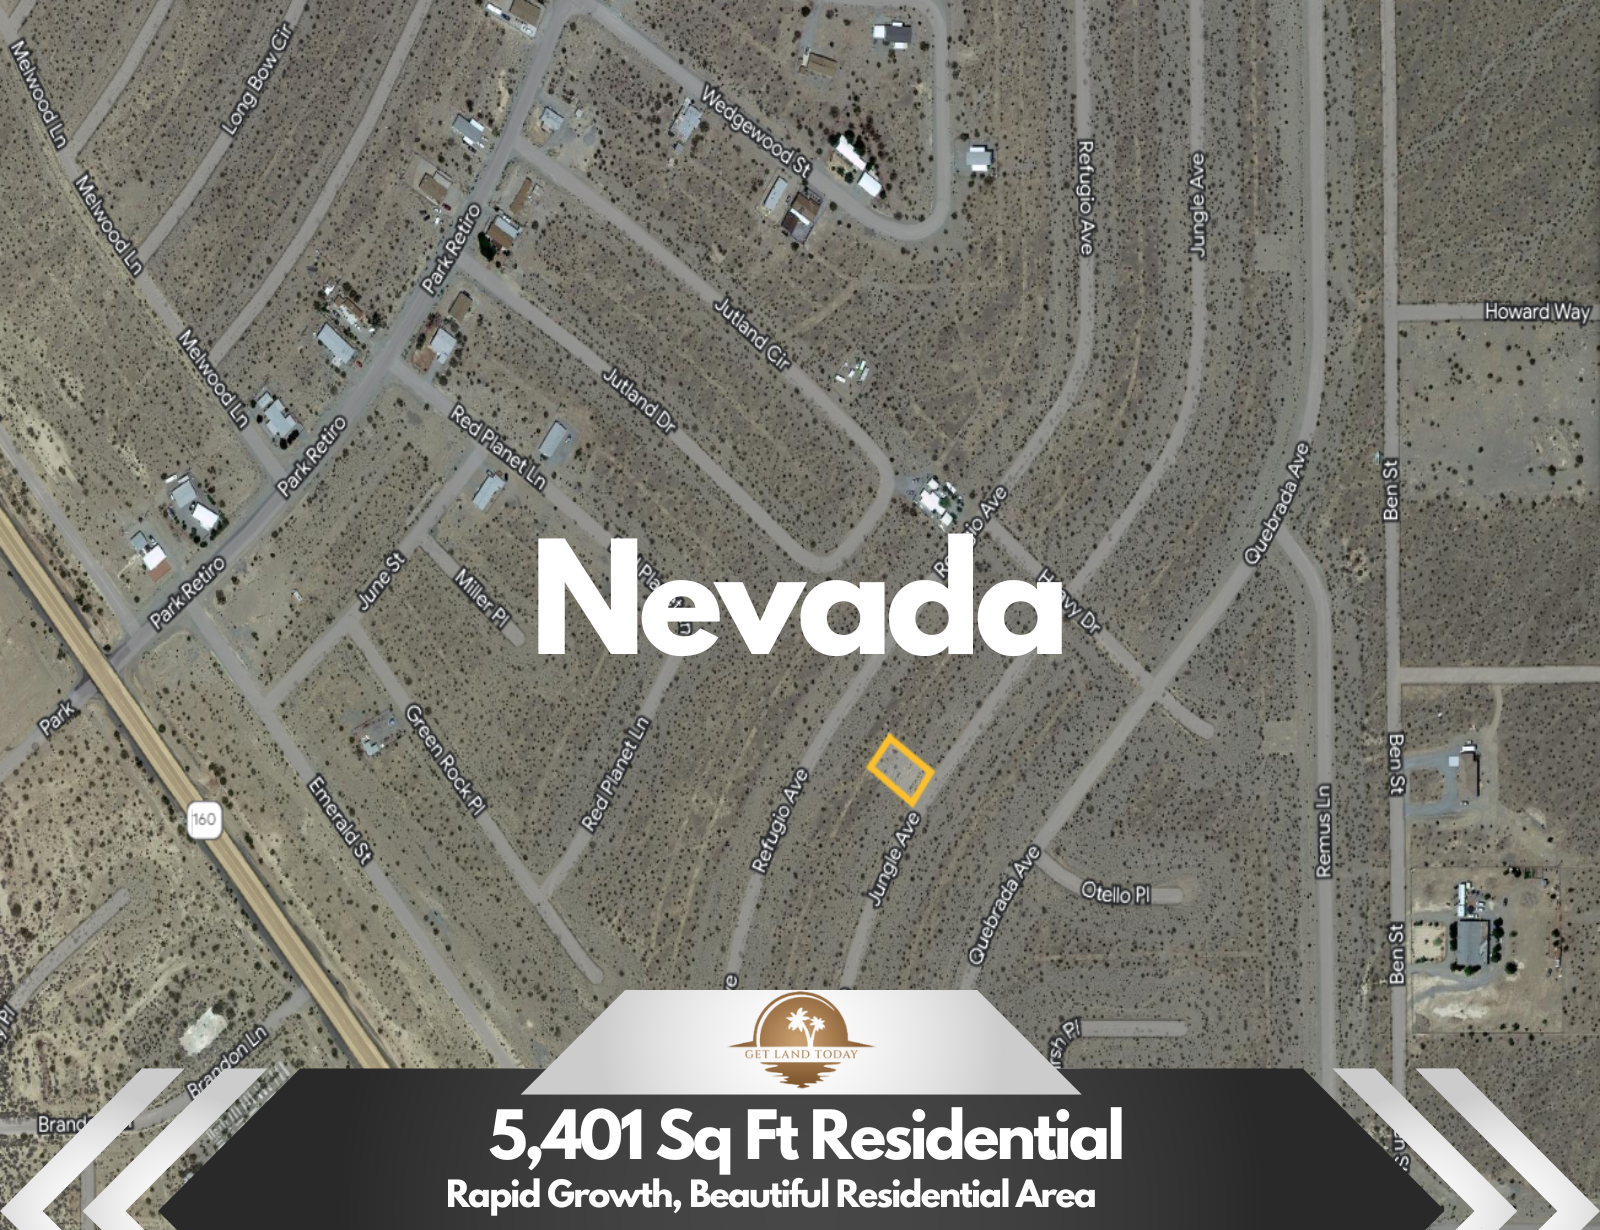 *NEW* NYE COUNTY, NEVADA RESIDENTIAL LOT! LOW MONTHLY PAYMENTS OF $175.00 6140 Jungle Ave., Pahrump, NV 89060 APN: 030-323-13 - Get Land Today